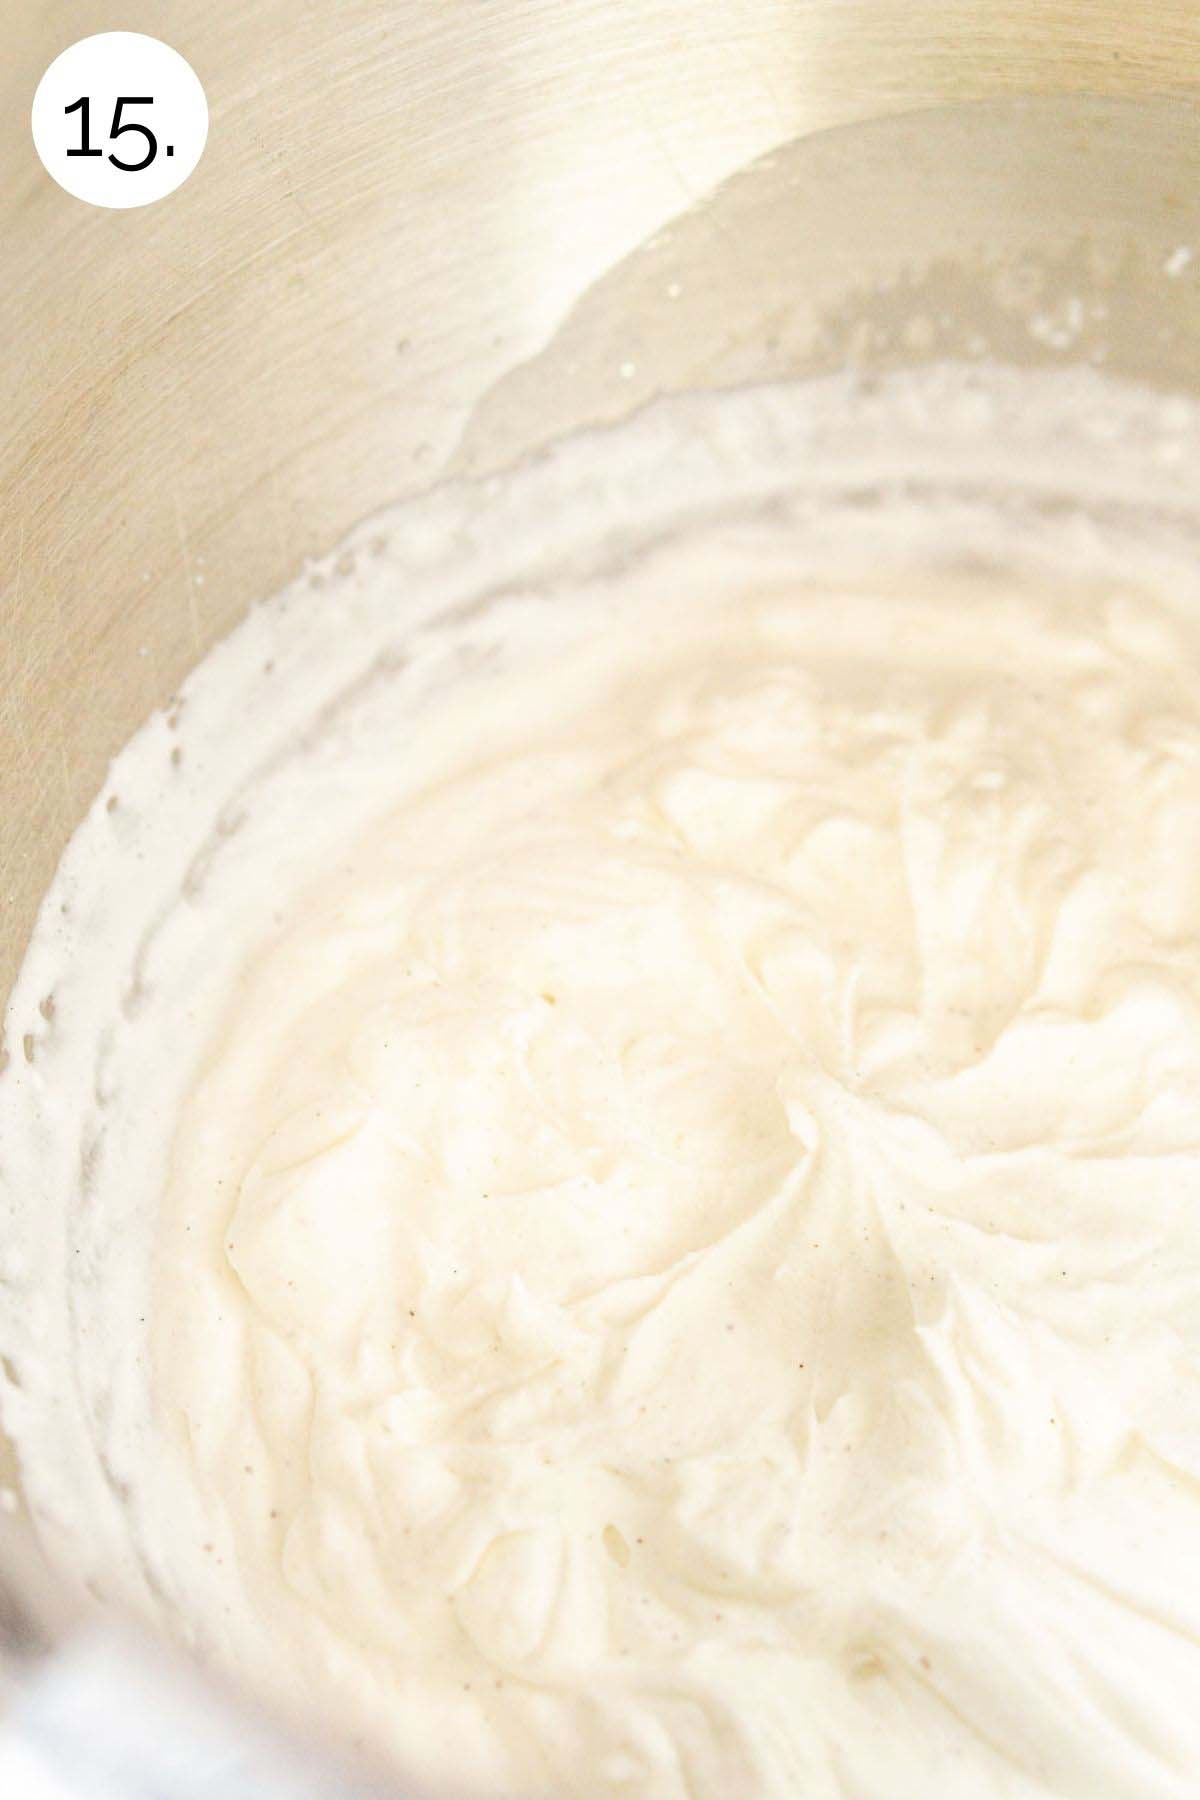 Beating the maple whipped cream in a bowl until stiff peaks form.